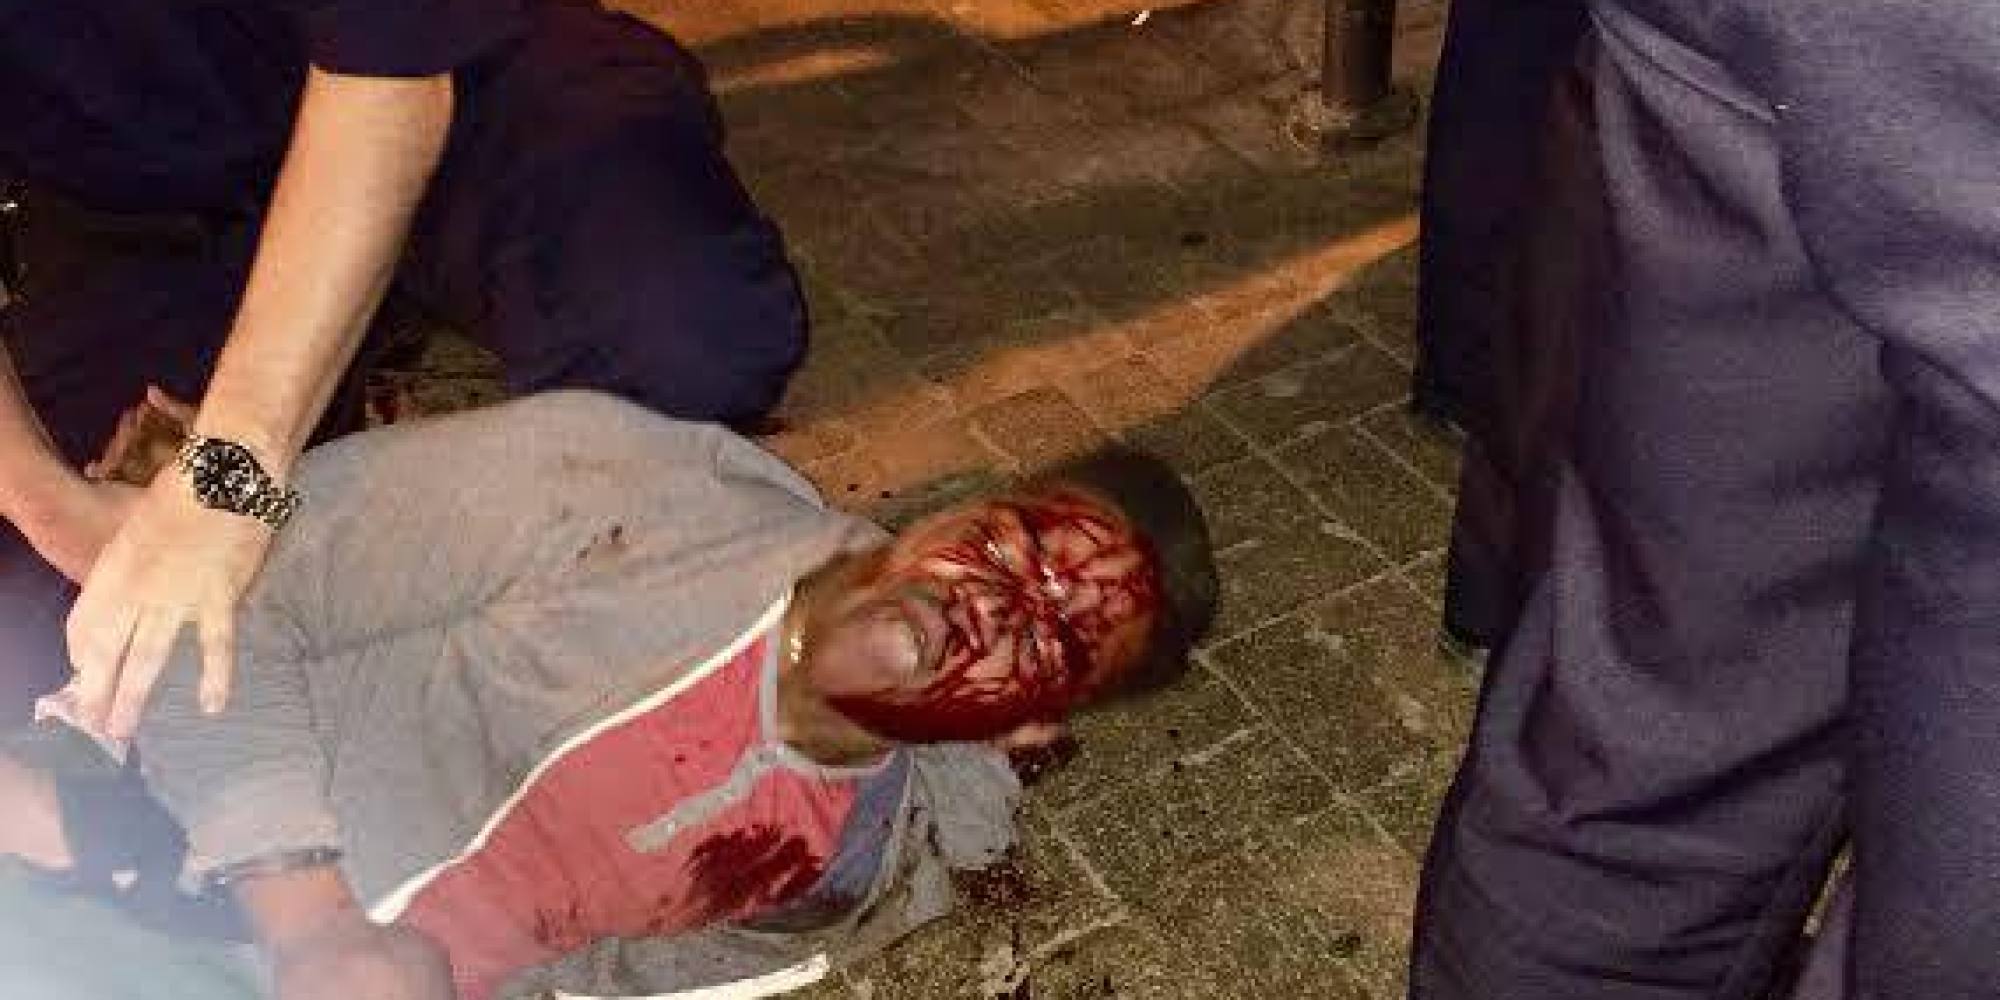 Martese Johnson's face was covered in blood following the violent arrest